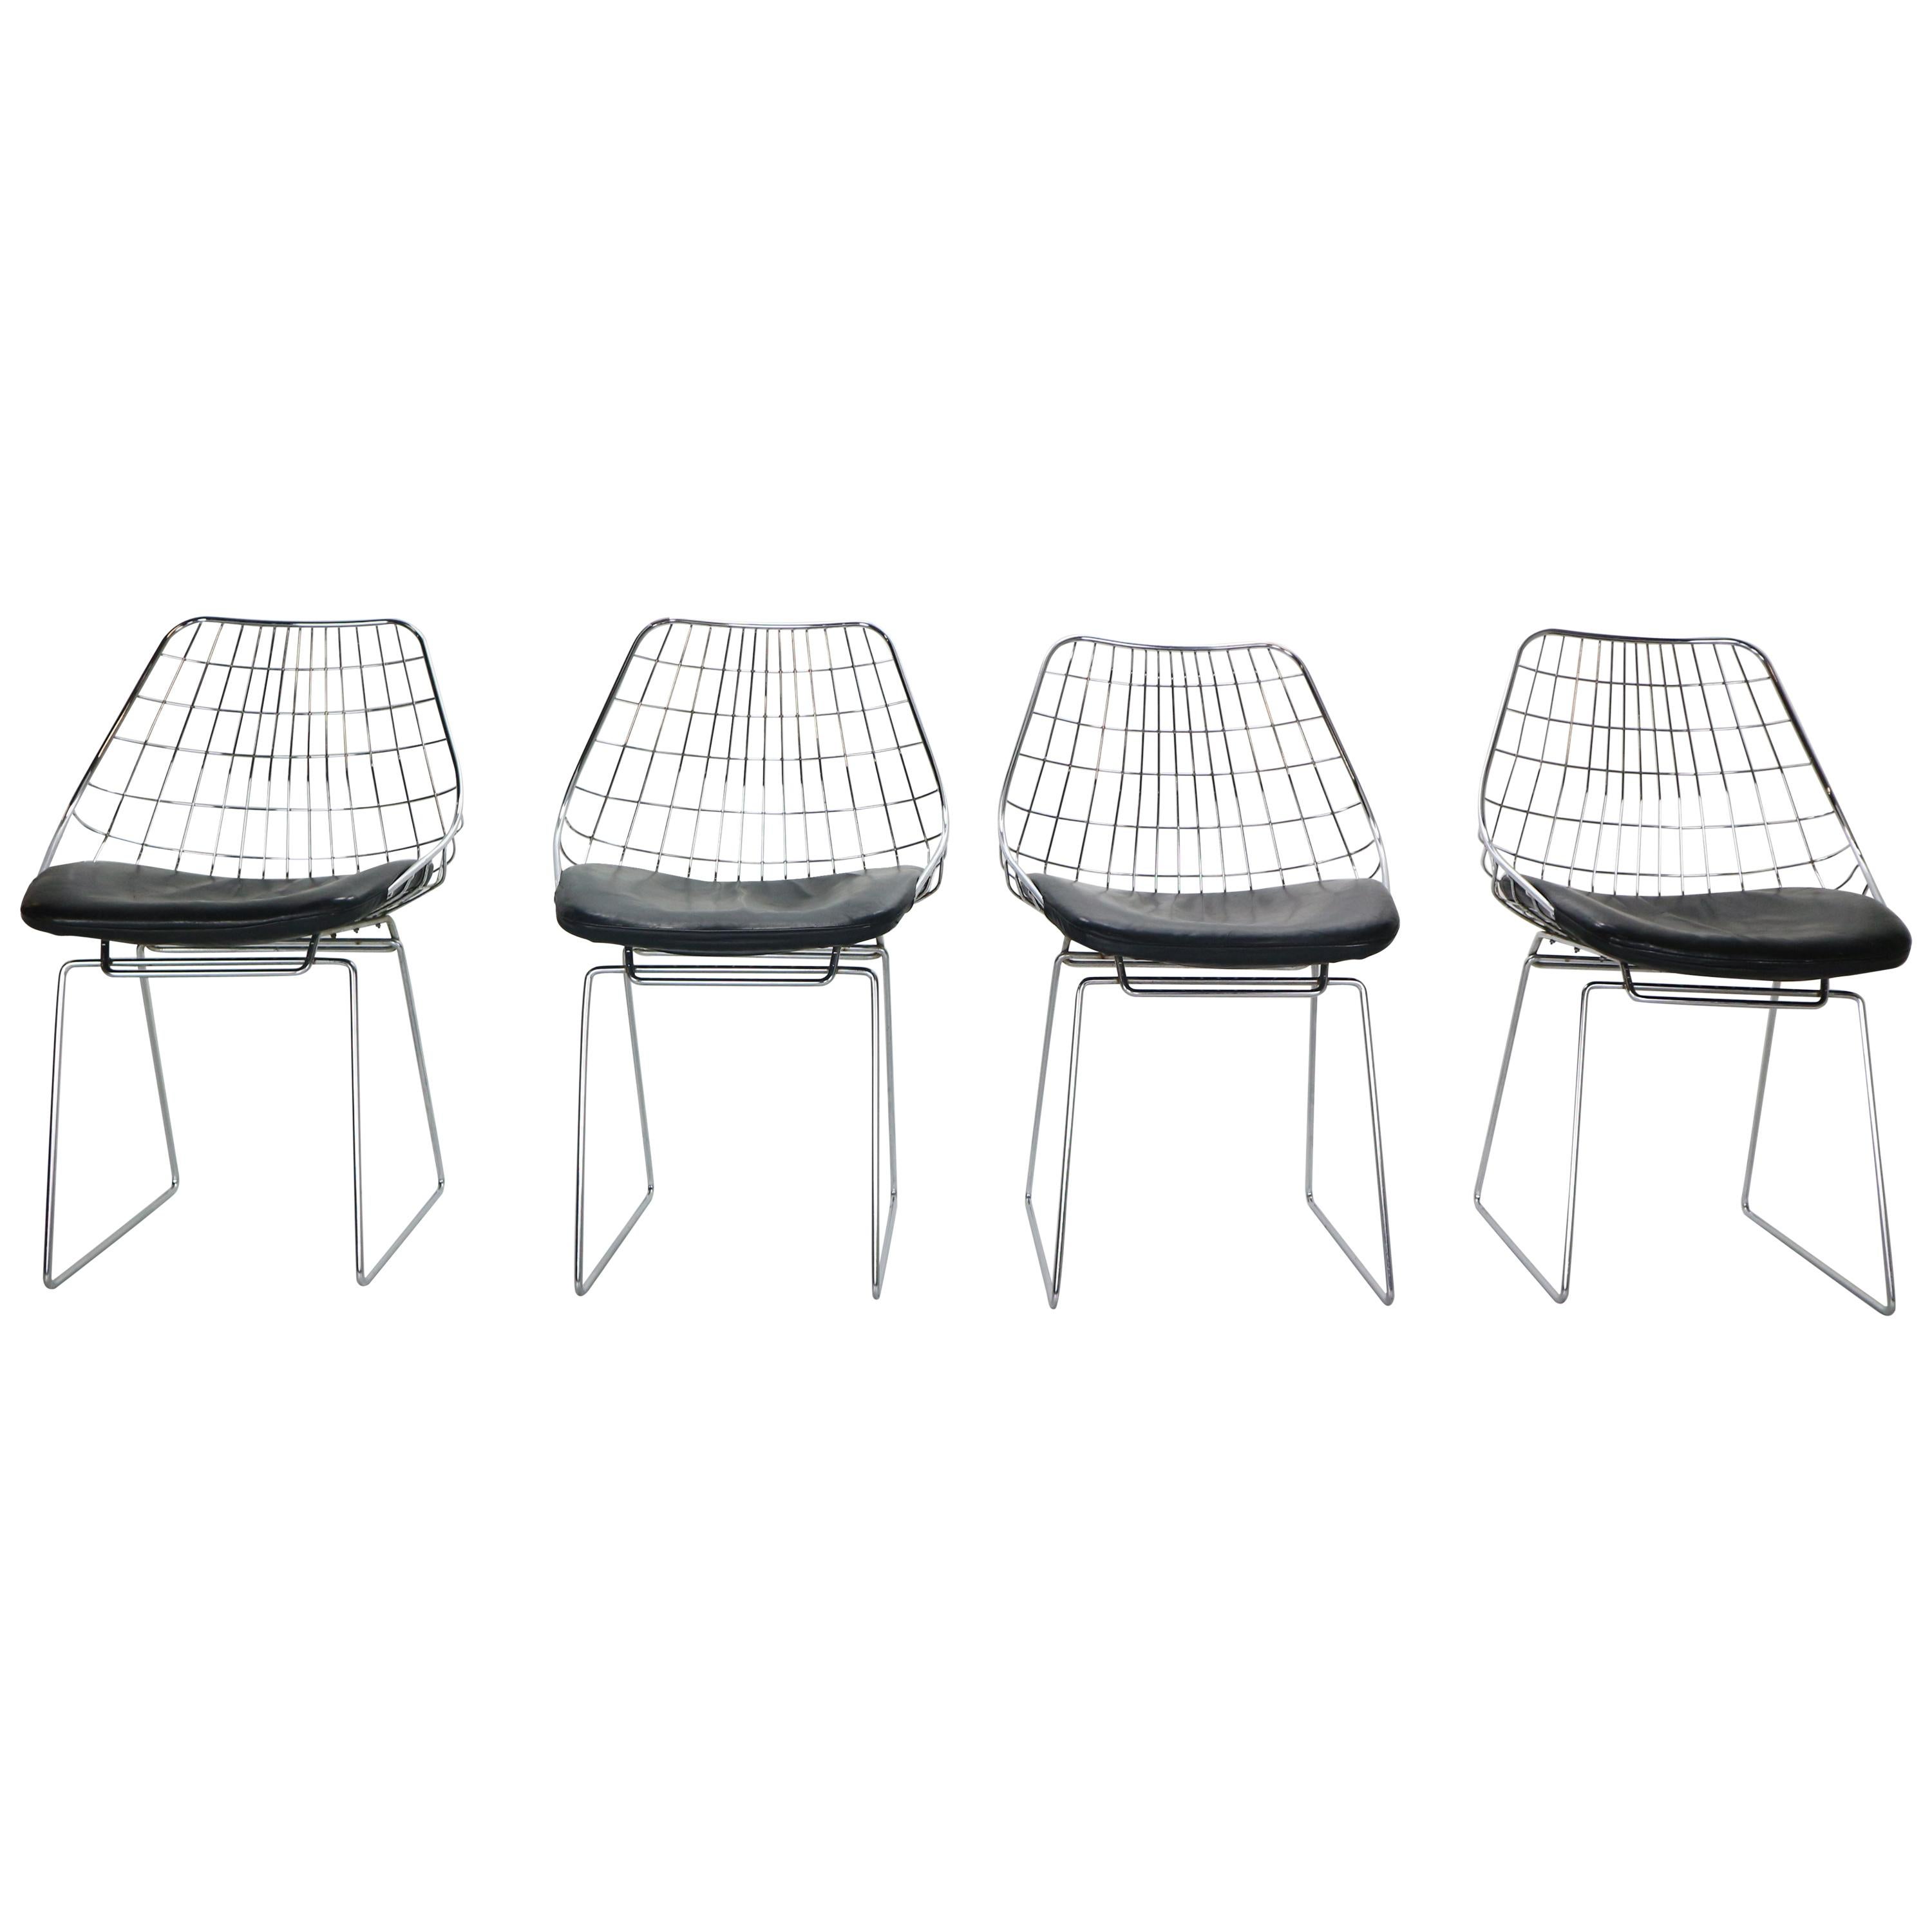 Cees Braakman Set of 4 Wire Chairs Model, 'SM05' for Pastoe, 1950s